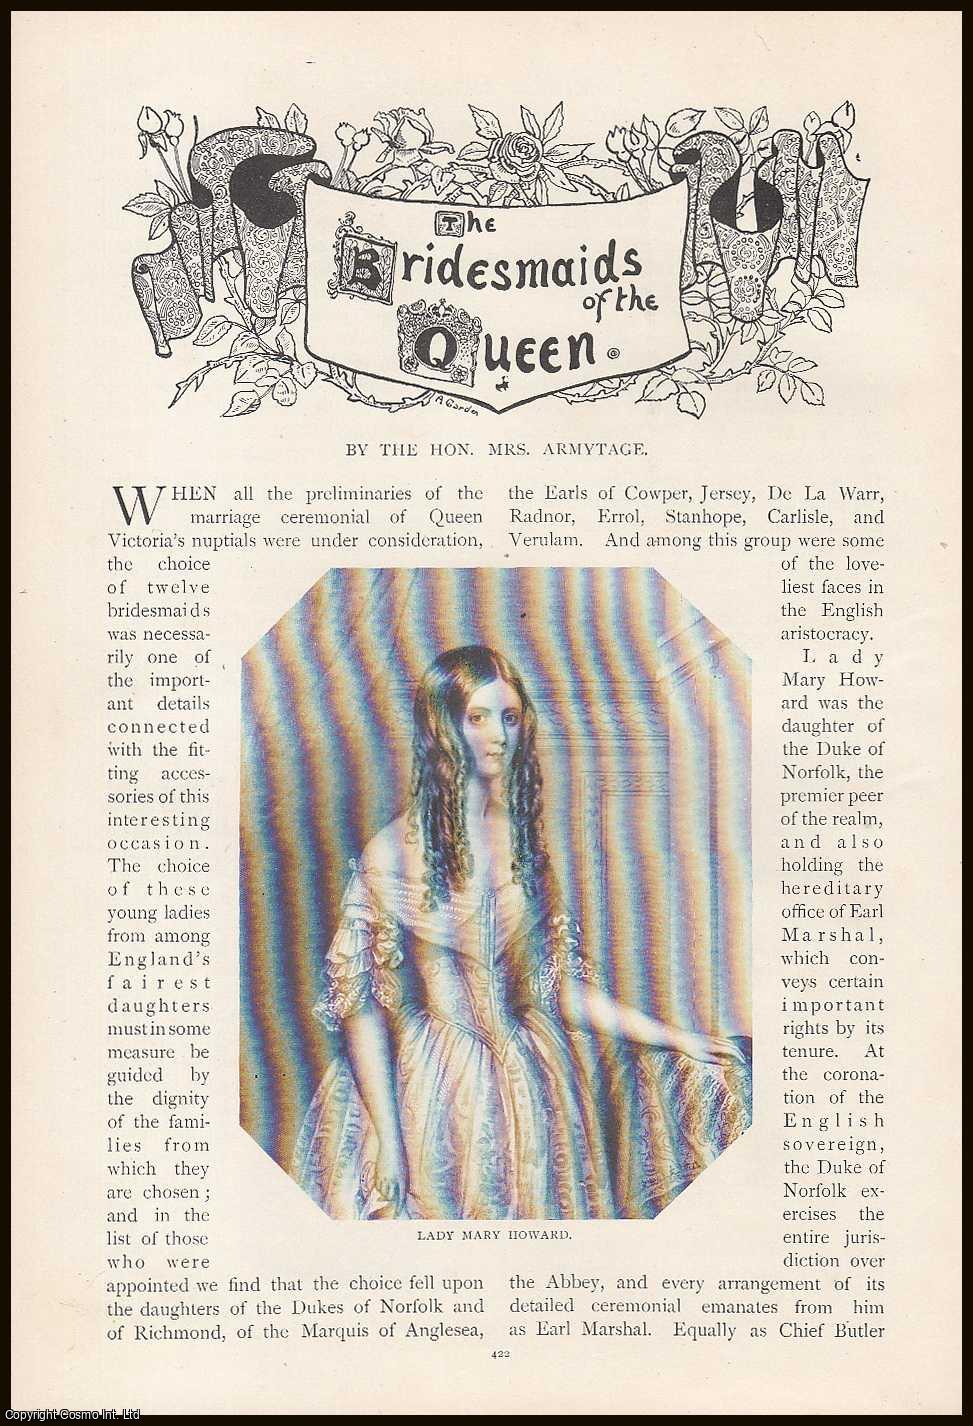 Hon. Mrs. Armytage - The 12 Bridesmaids of The Queen Victoria. An original article from the Lady's Realm 1898-99.